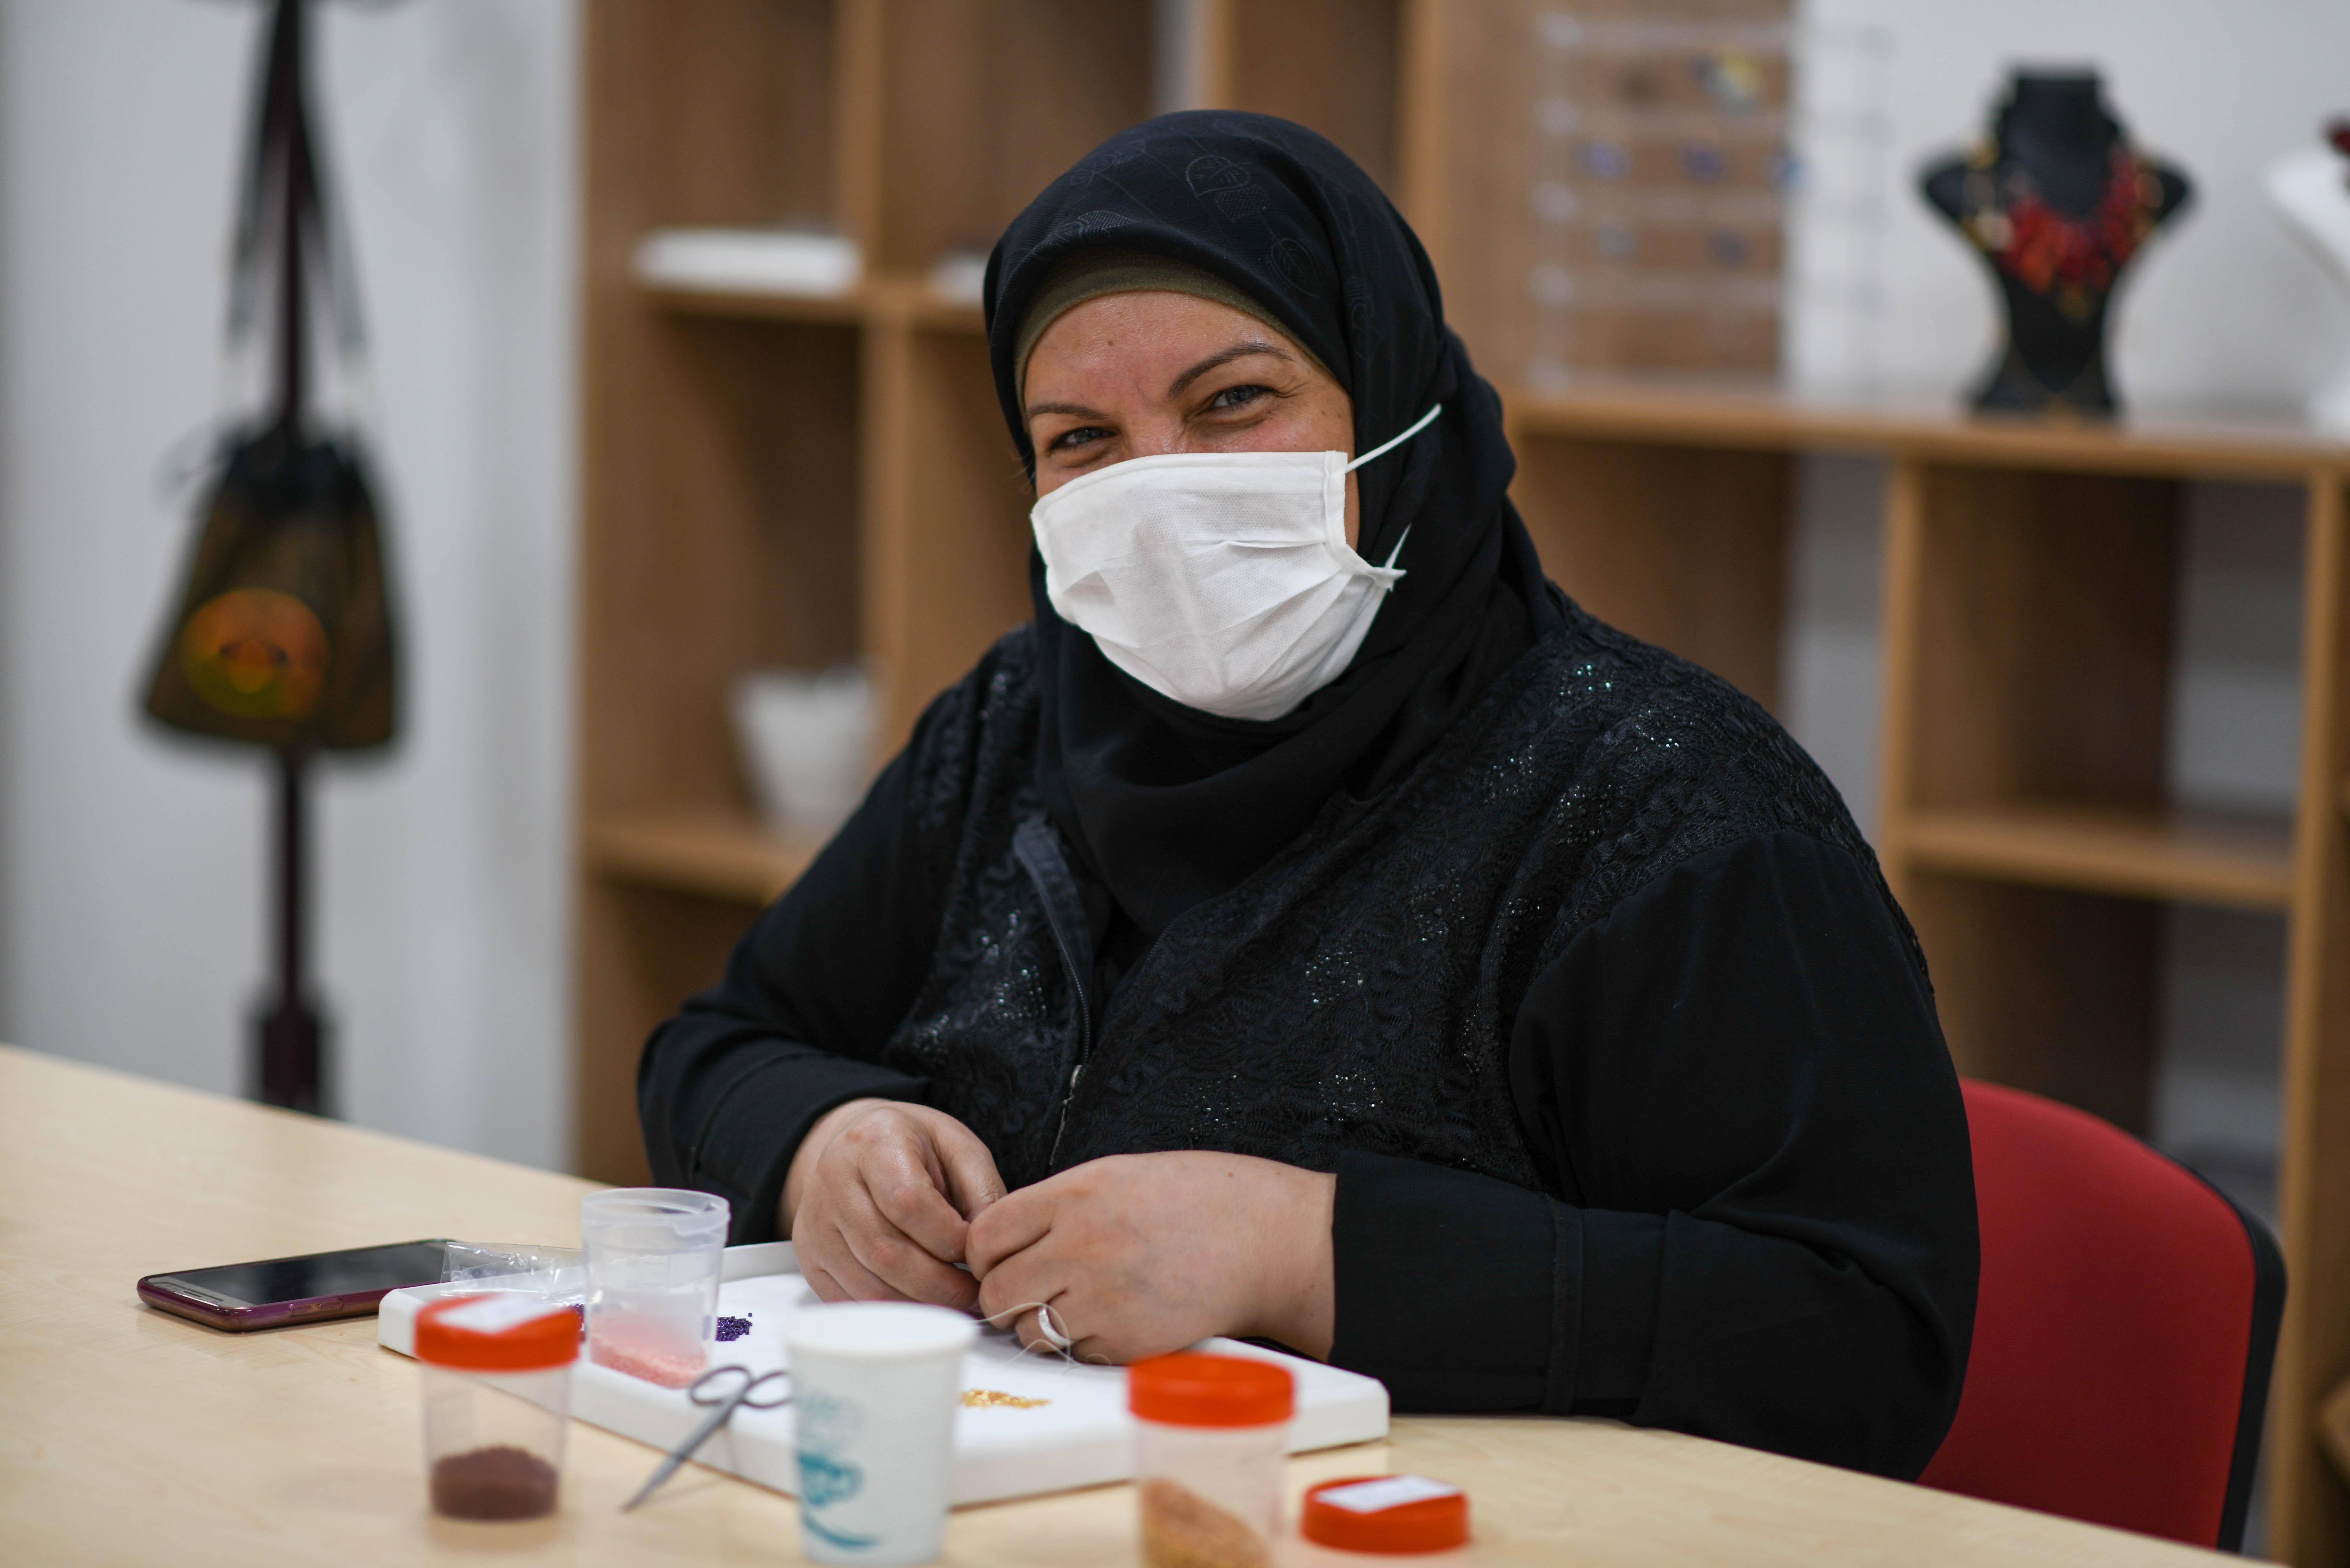 Turkish and Syrian women are attending a jewellery design course at a Community Center run by Turkish Red Crescent in partnership with IFRC in Ankara's Altindag district on August 19, 2020. Community centres, located in 15 cities across Turkey, increase livelihoods, resilience and self-reliance, provide community-based health and first aid, give psychosocial support to both refugees and host community.